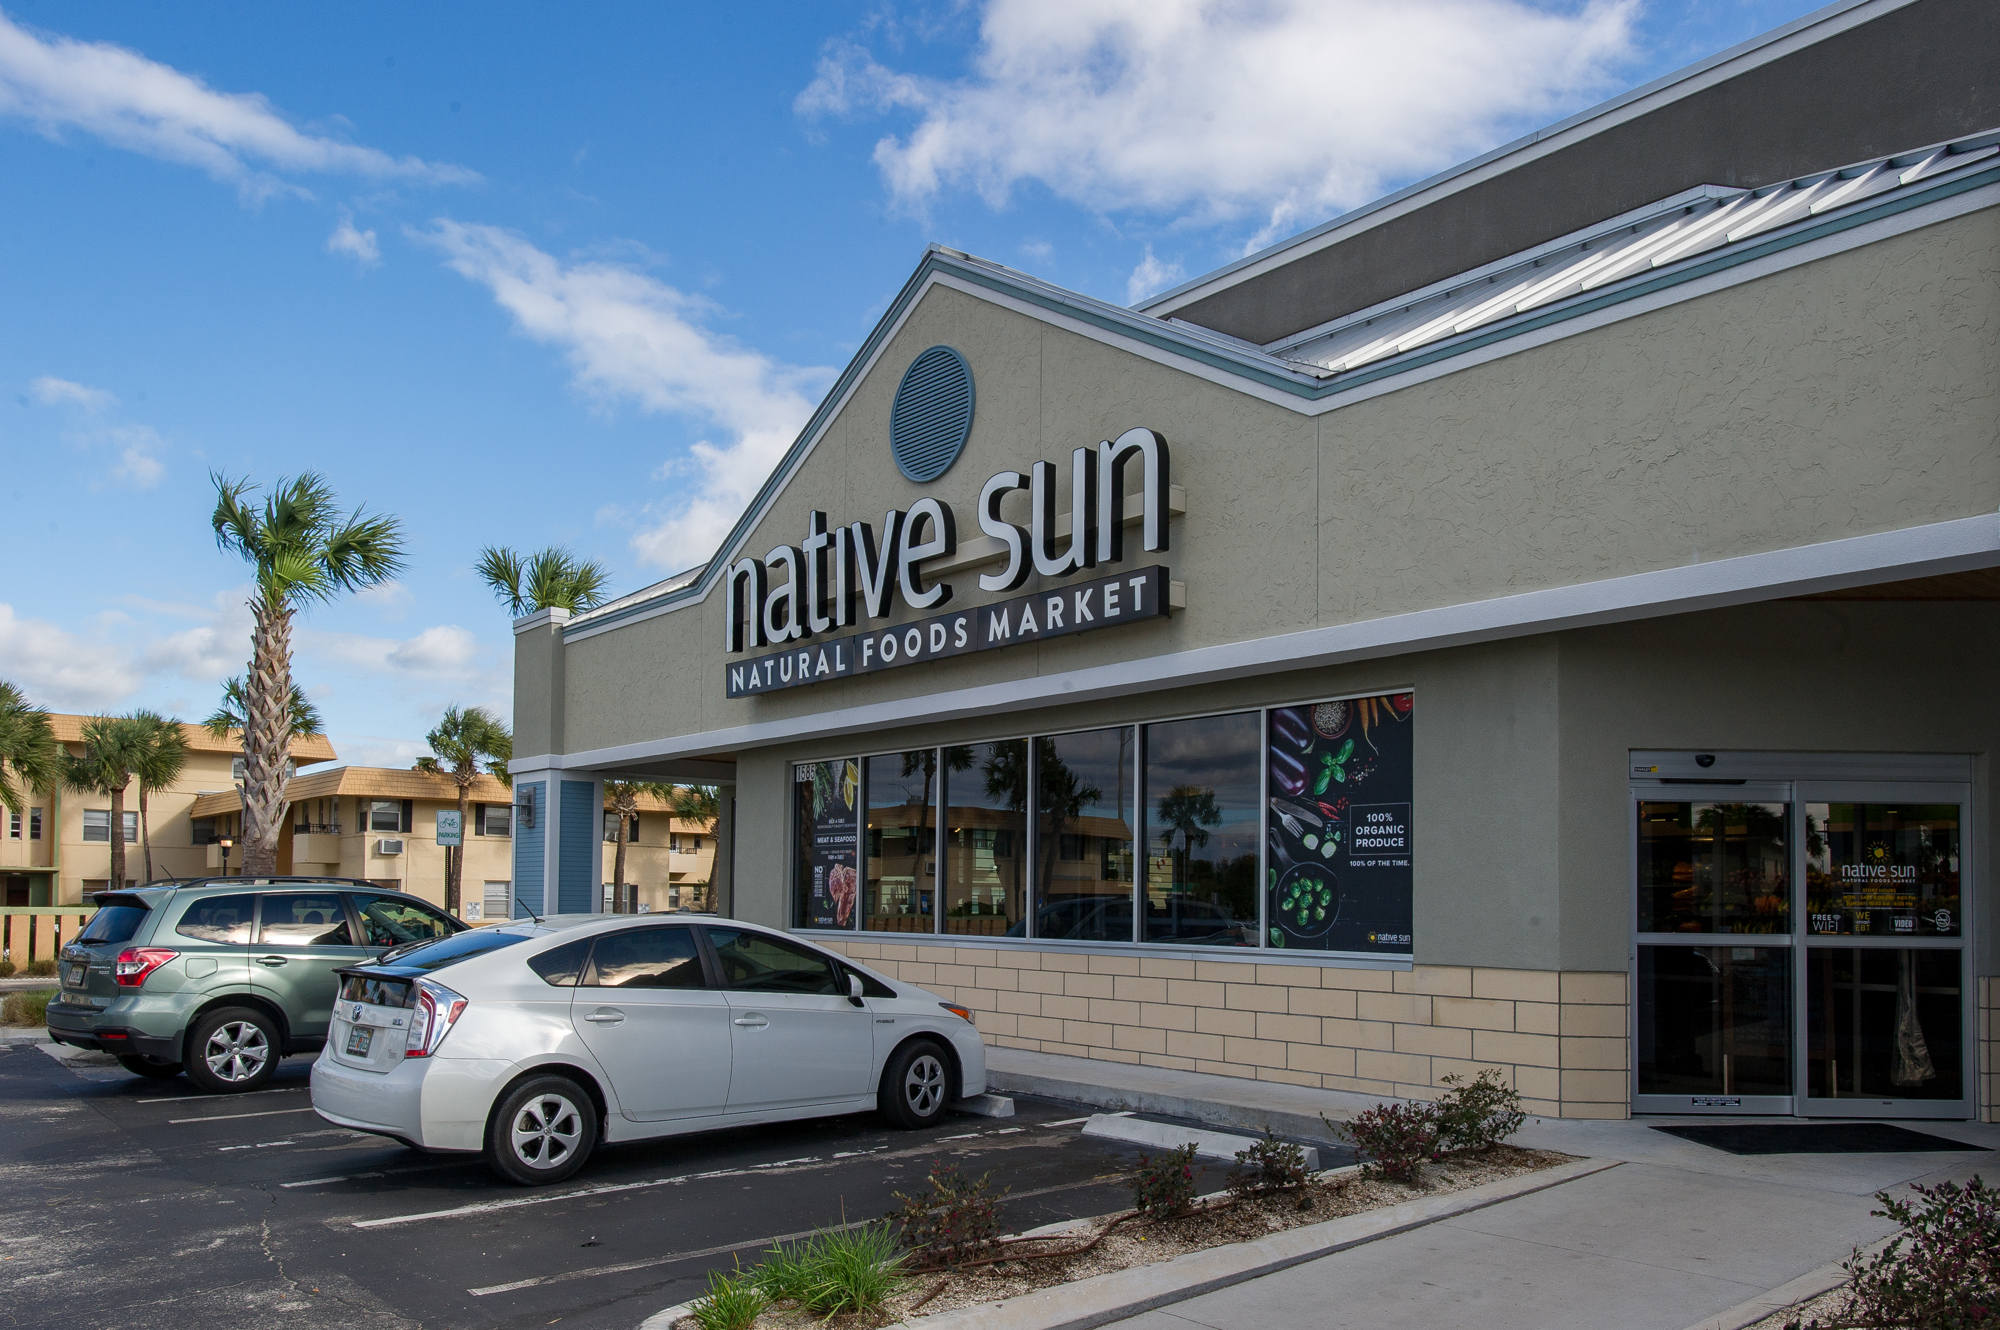 The Native Sun Natural Foods pop-up restaurant will open Monday at 1585 N. Third St. in Jacksonville Beach.